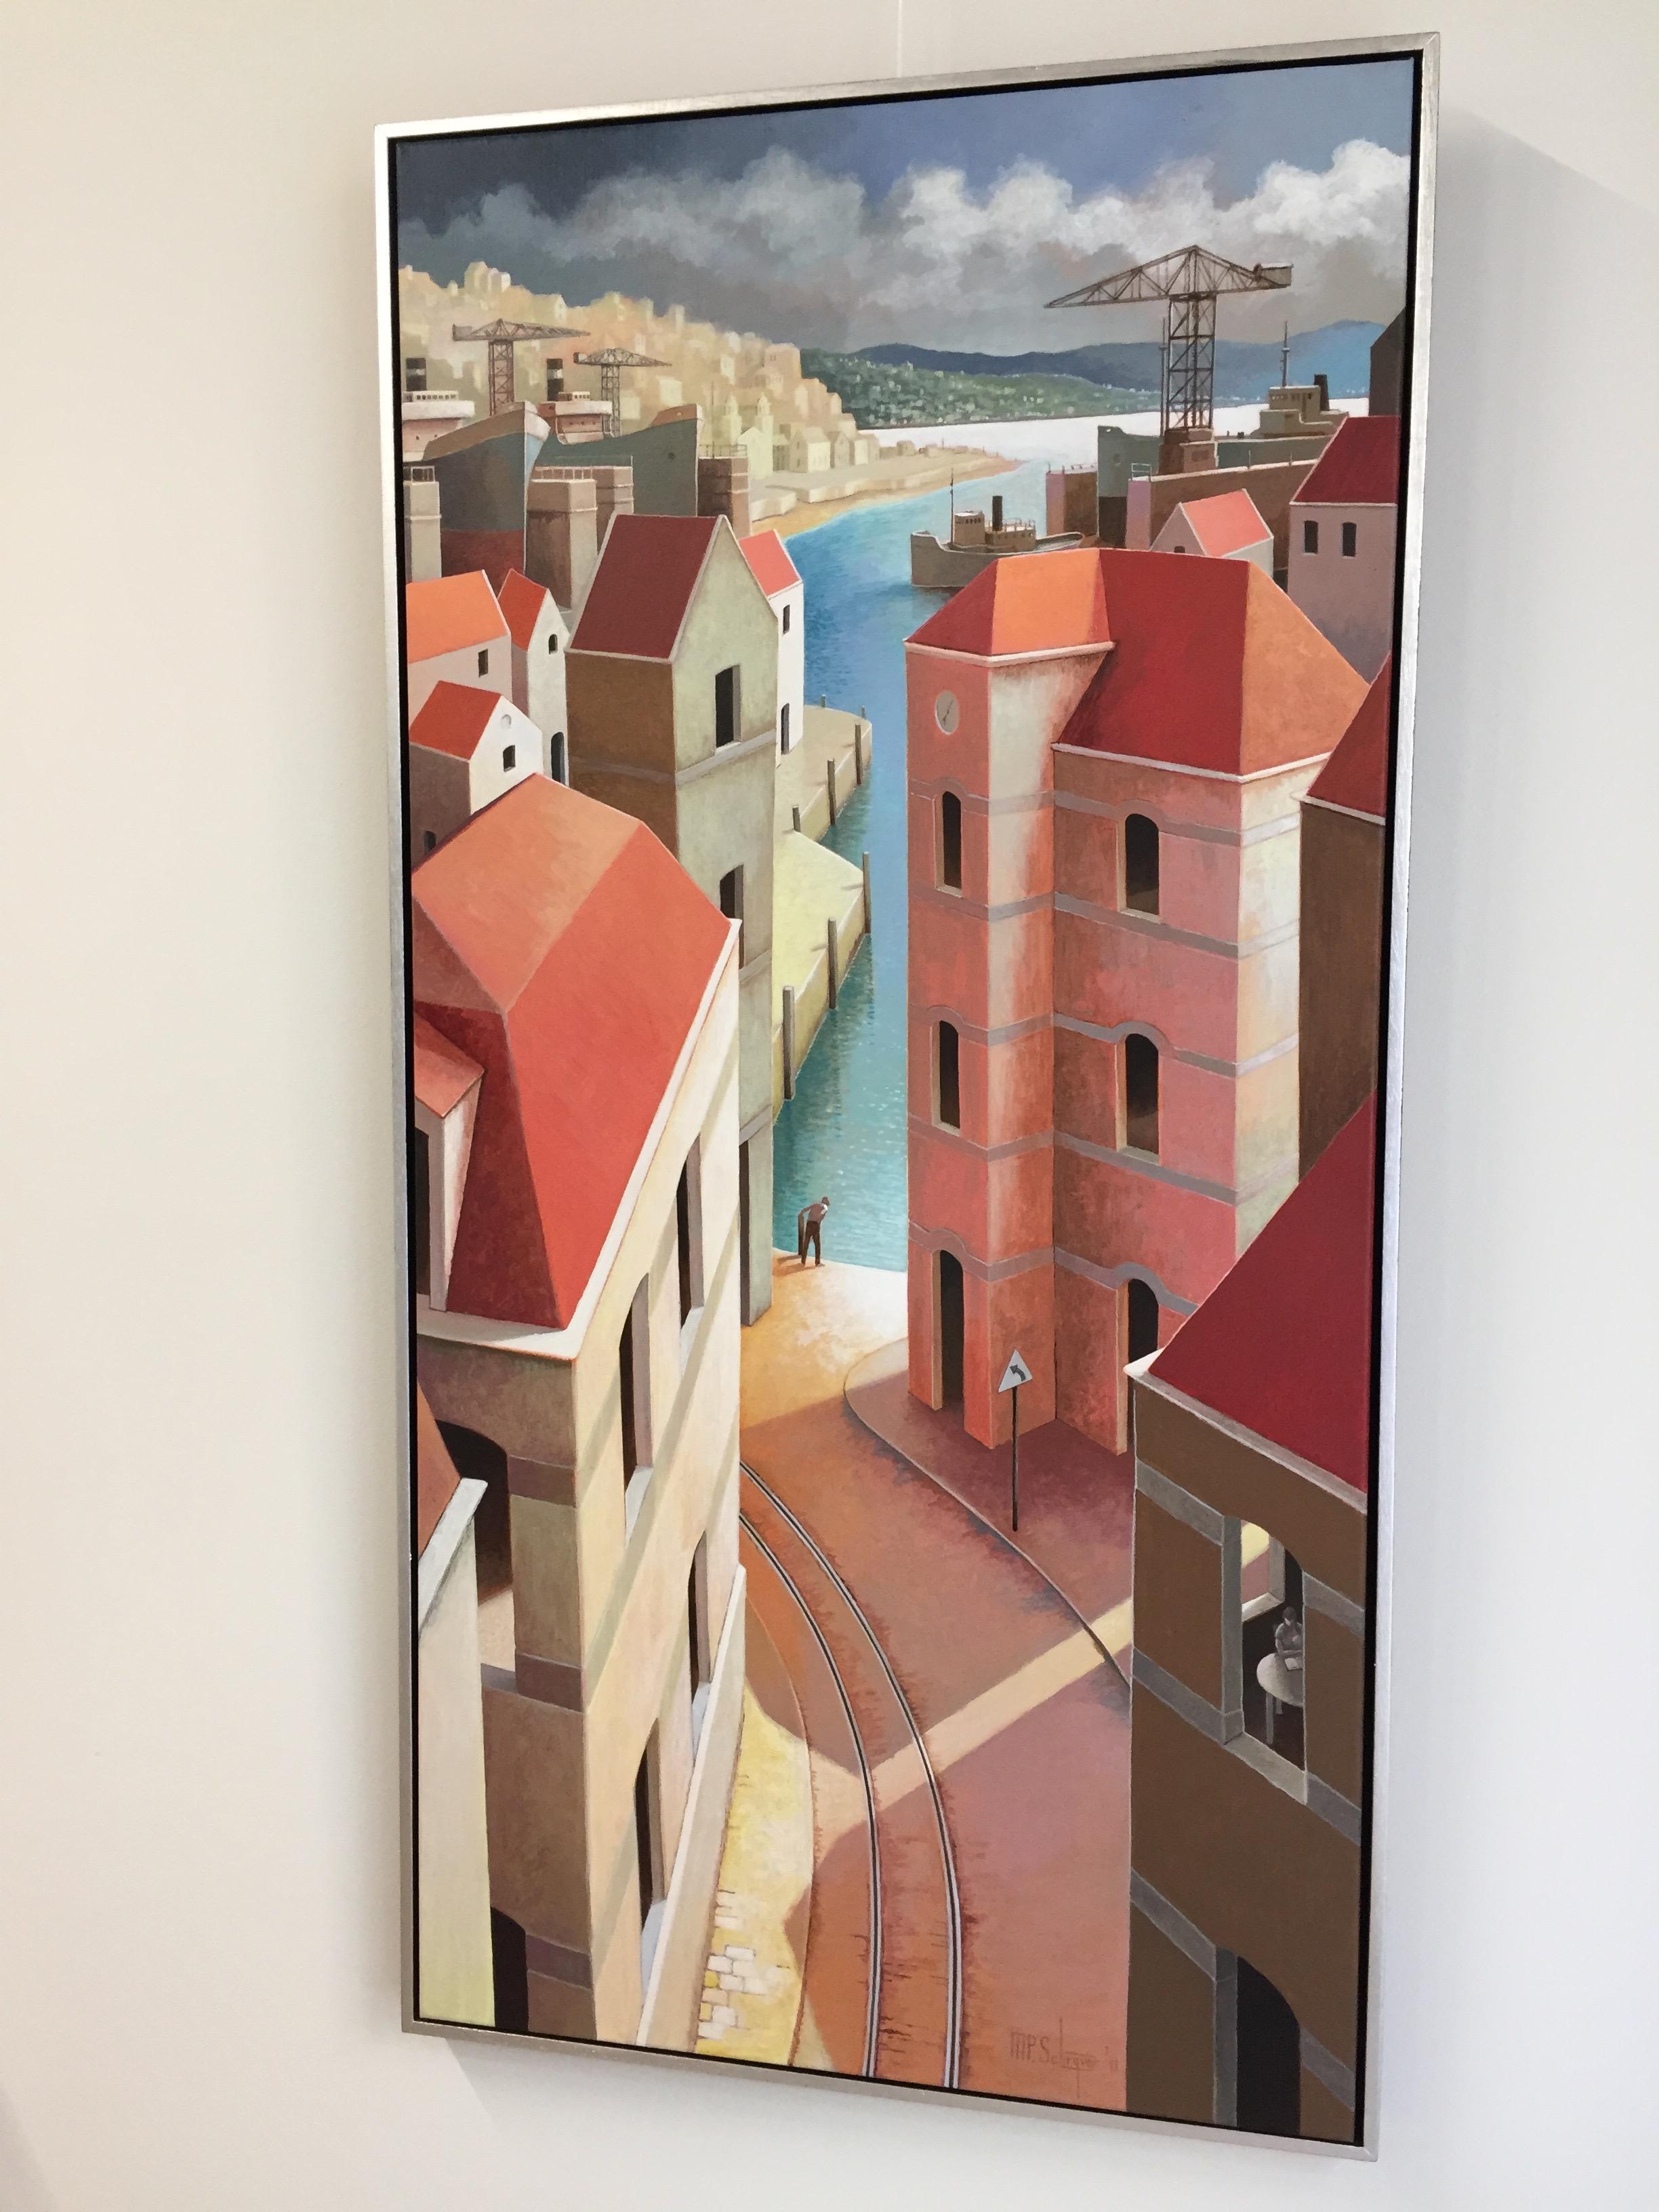 Dutch Painter Michiel Schrijver lives and works in the center of the Netherlands. 

The paintings originate from his memory. The first step is to make a small and fairly rough outline. After this beginning, the composition is determined and the